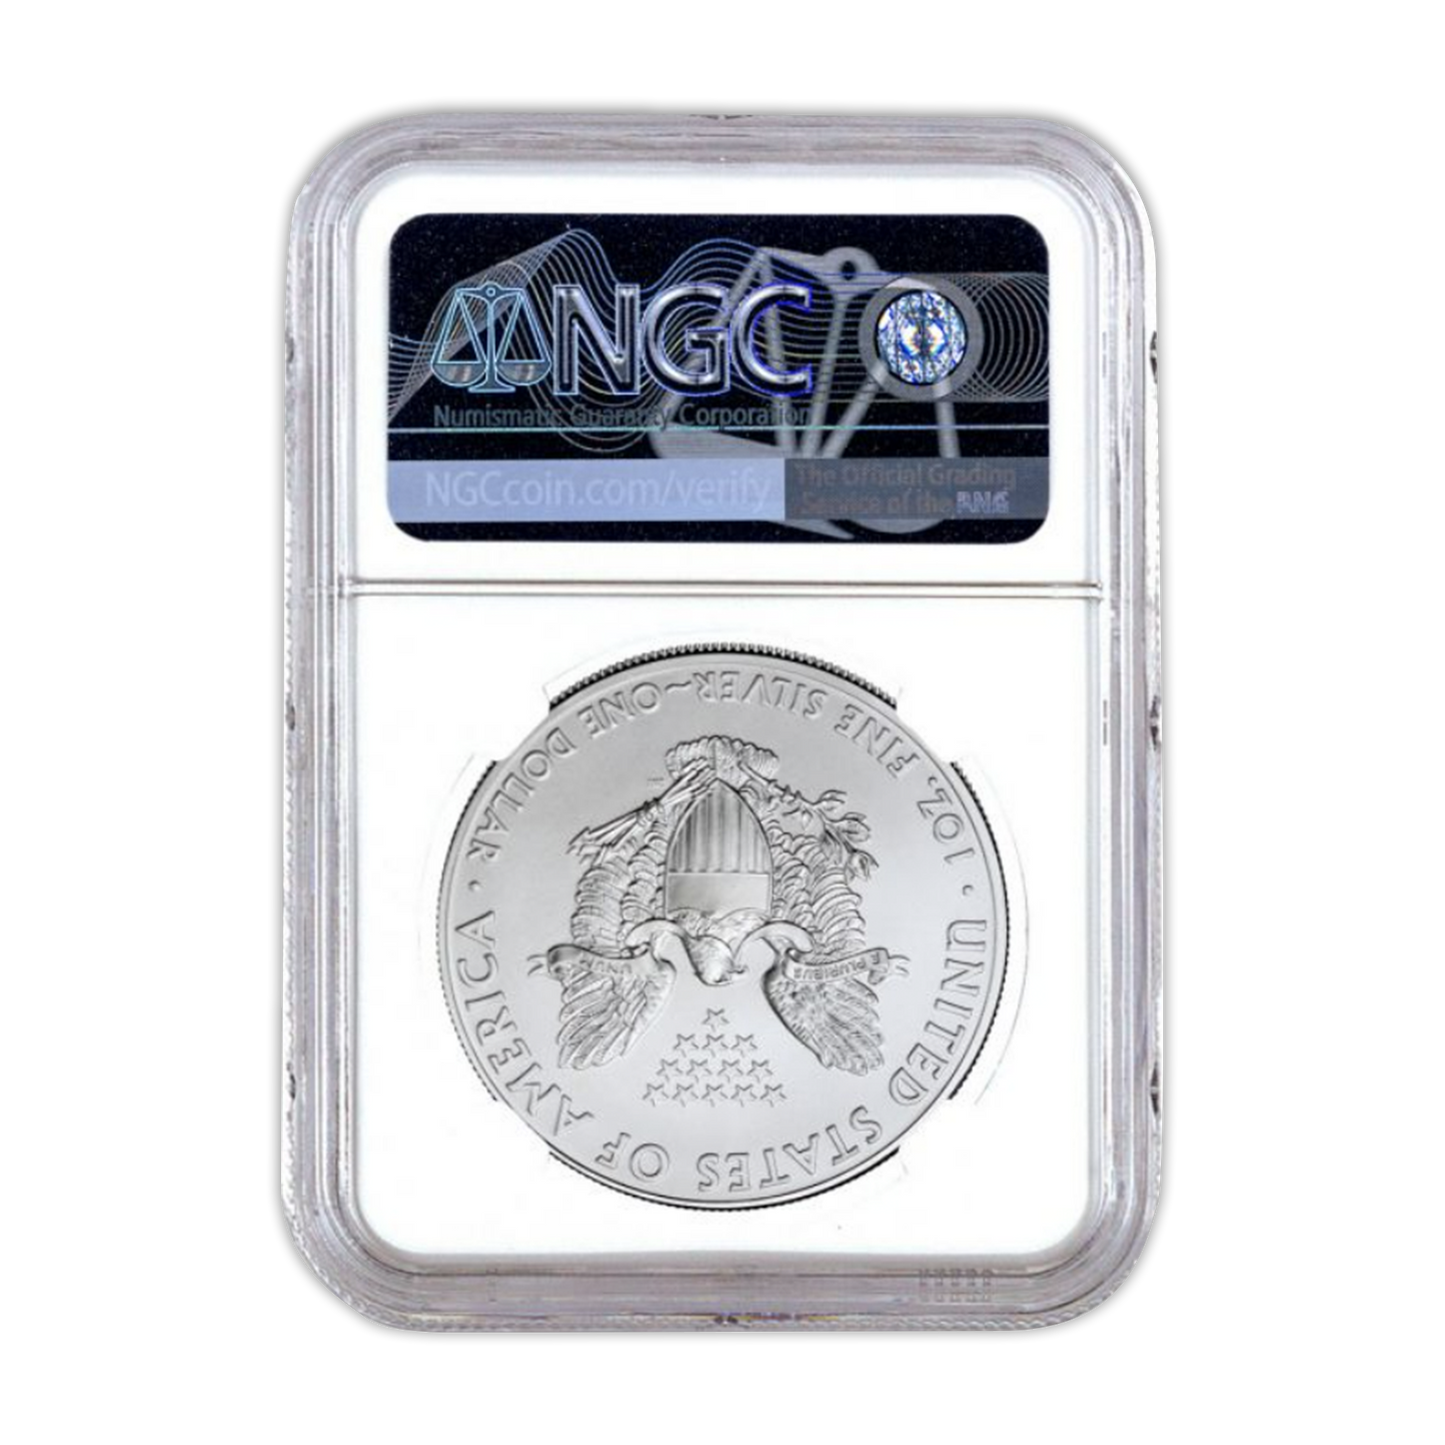 2015 W Silver Eagle - Statue of Liberty Label - NGC MS70 Early Releases